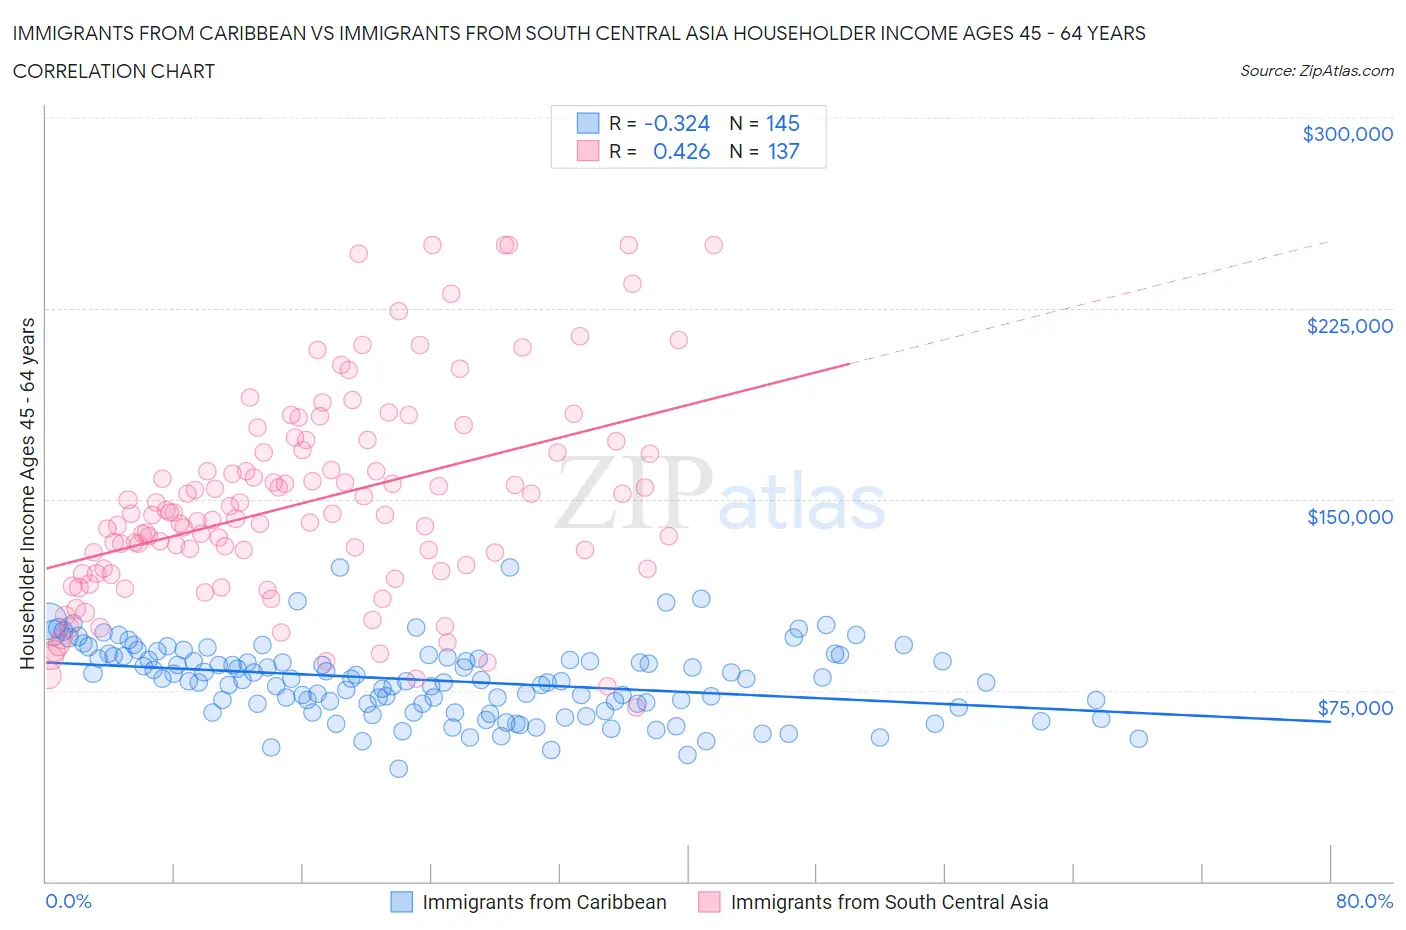 Immigrants from Caribbean vs Immigrants from South Central Asia Householder Income Ages 45 - 64 years